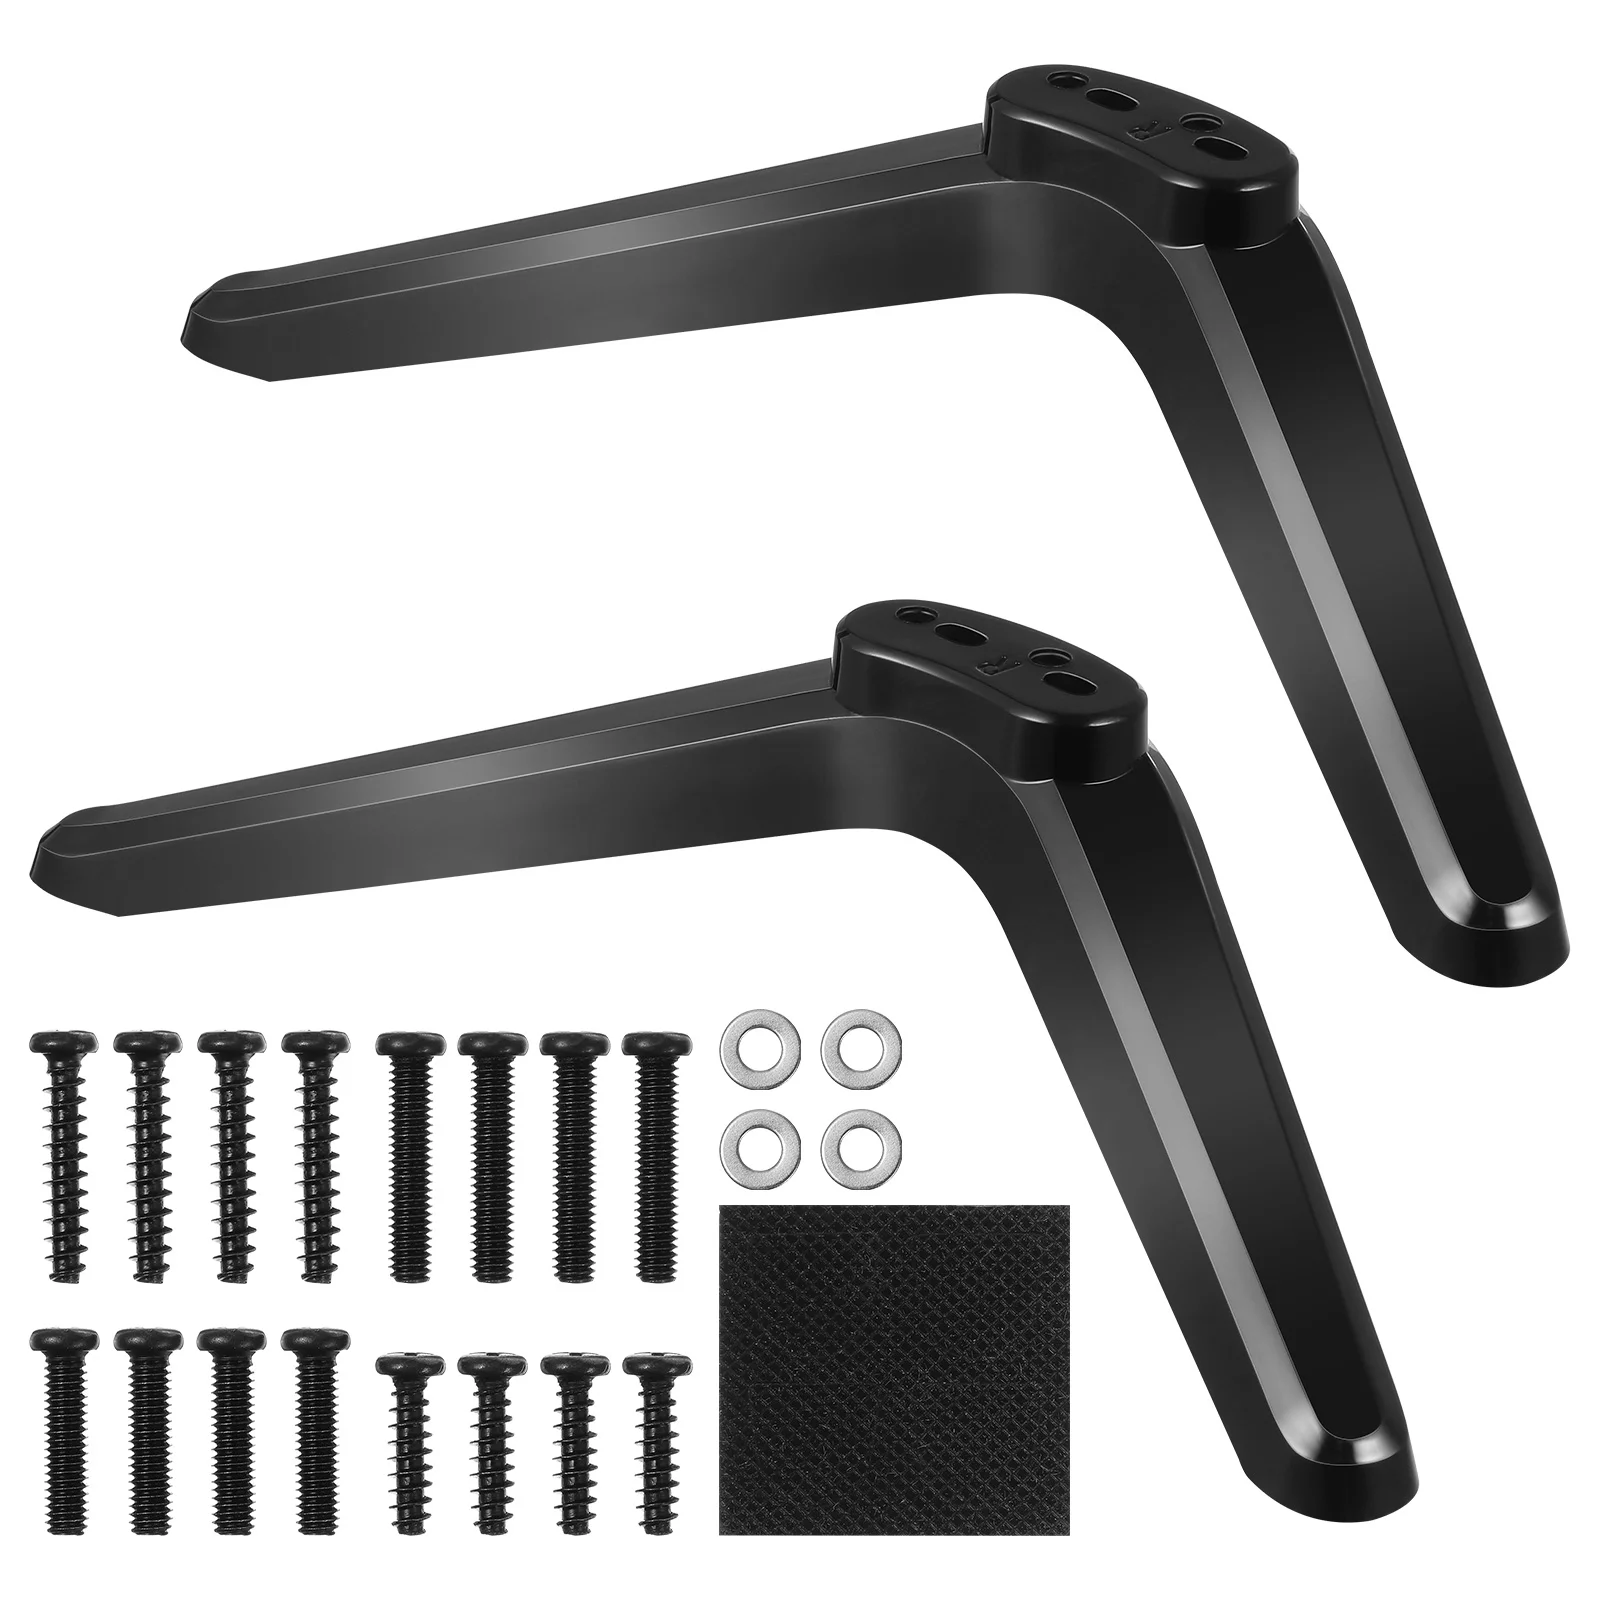 

2 Pcs Mount Stands Mounting Brackets Tabletop Holder Stand With Screws Monitor support Tv